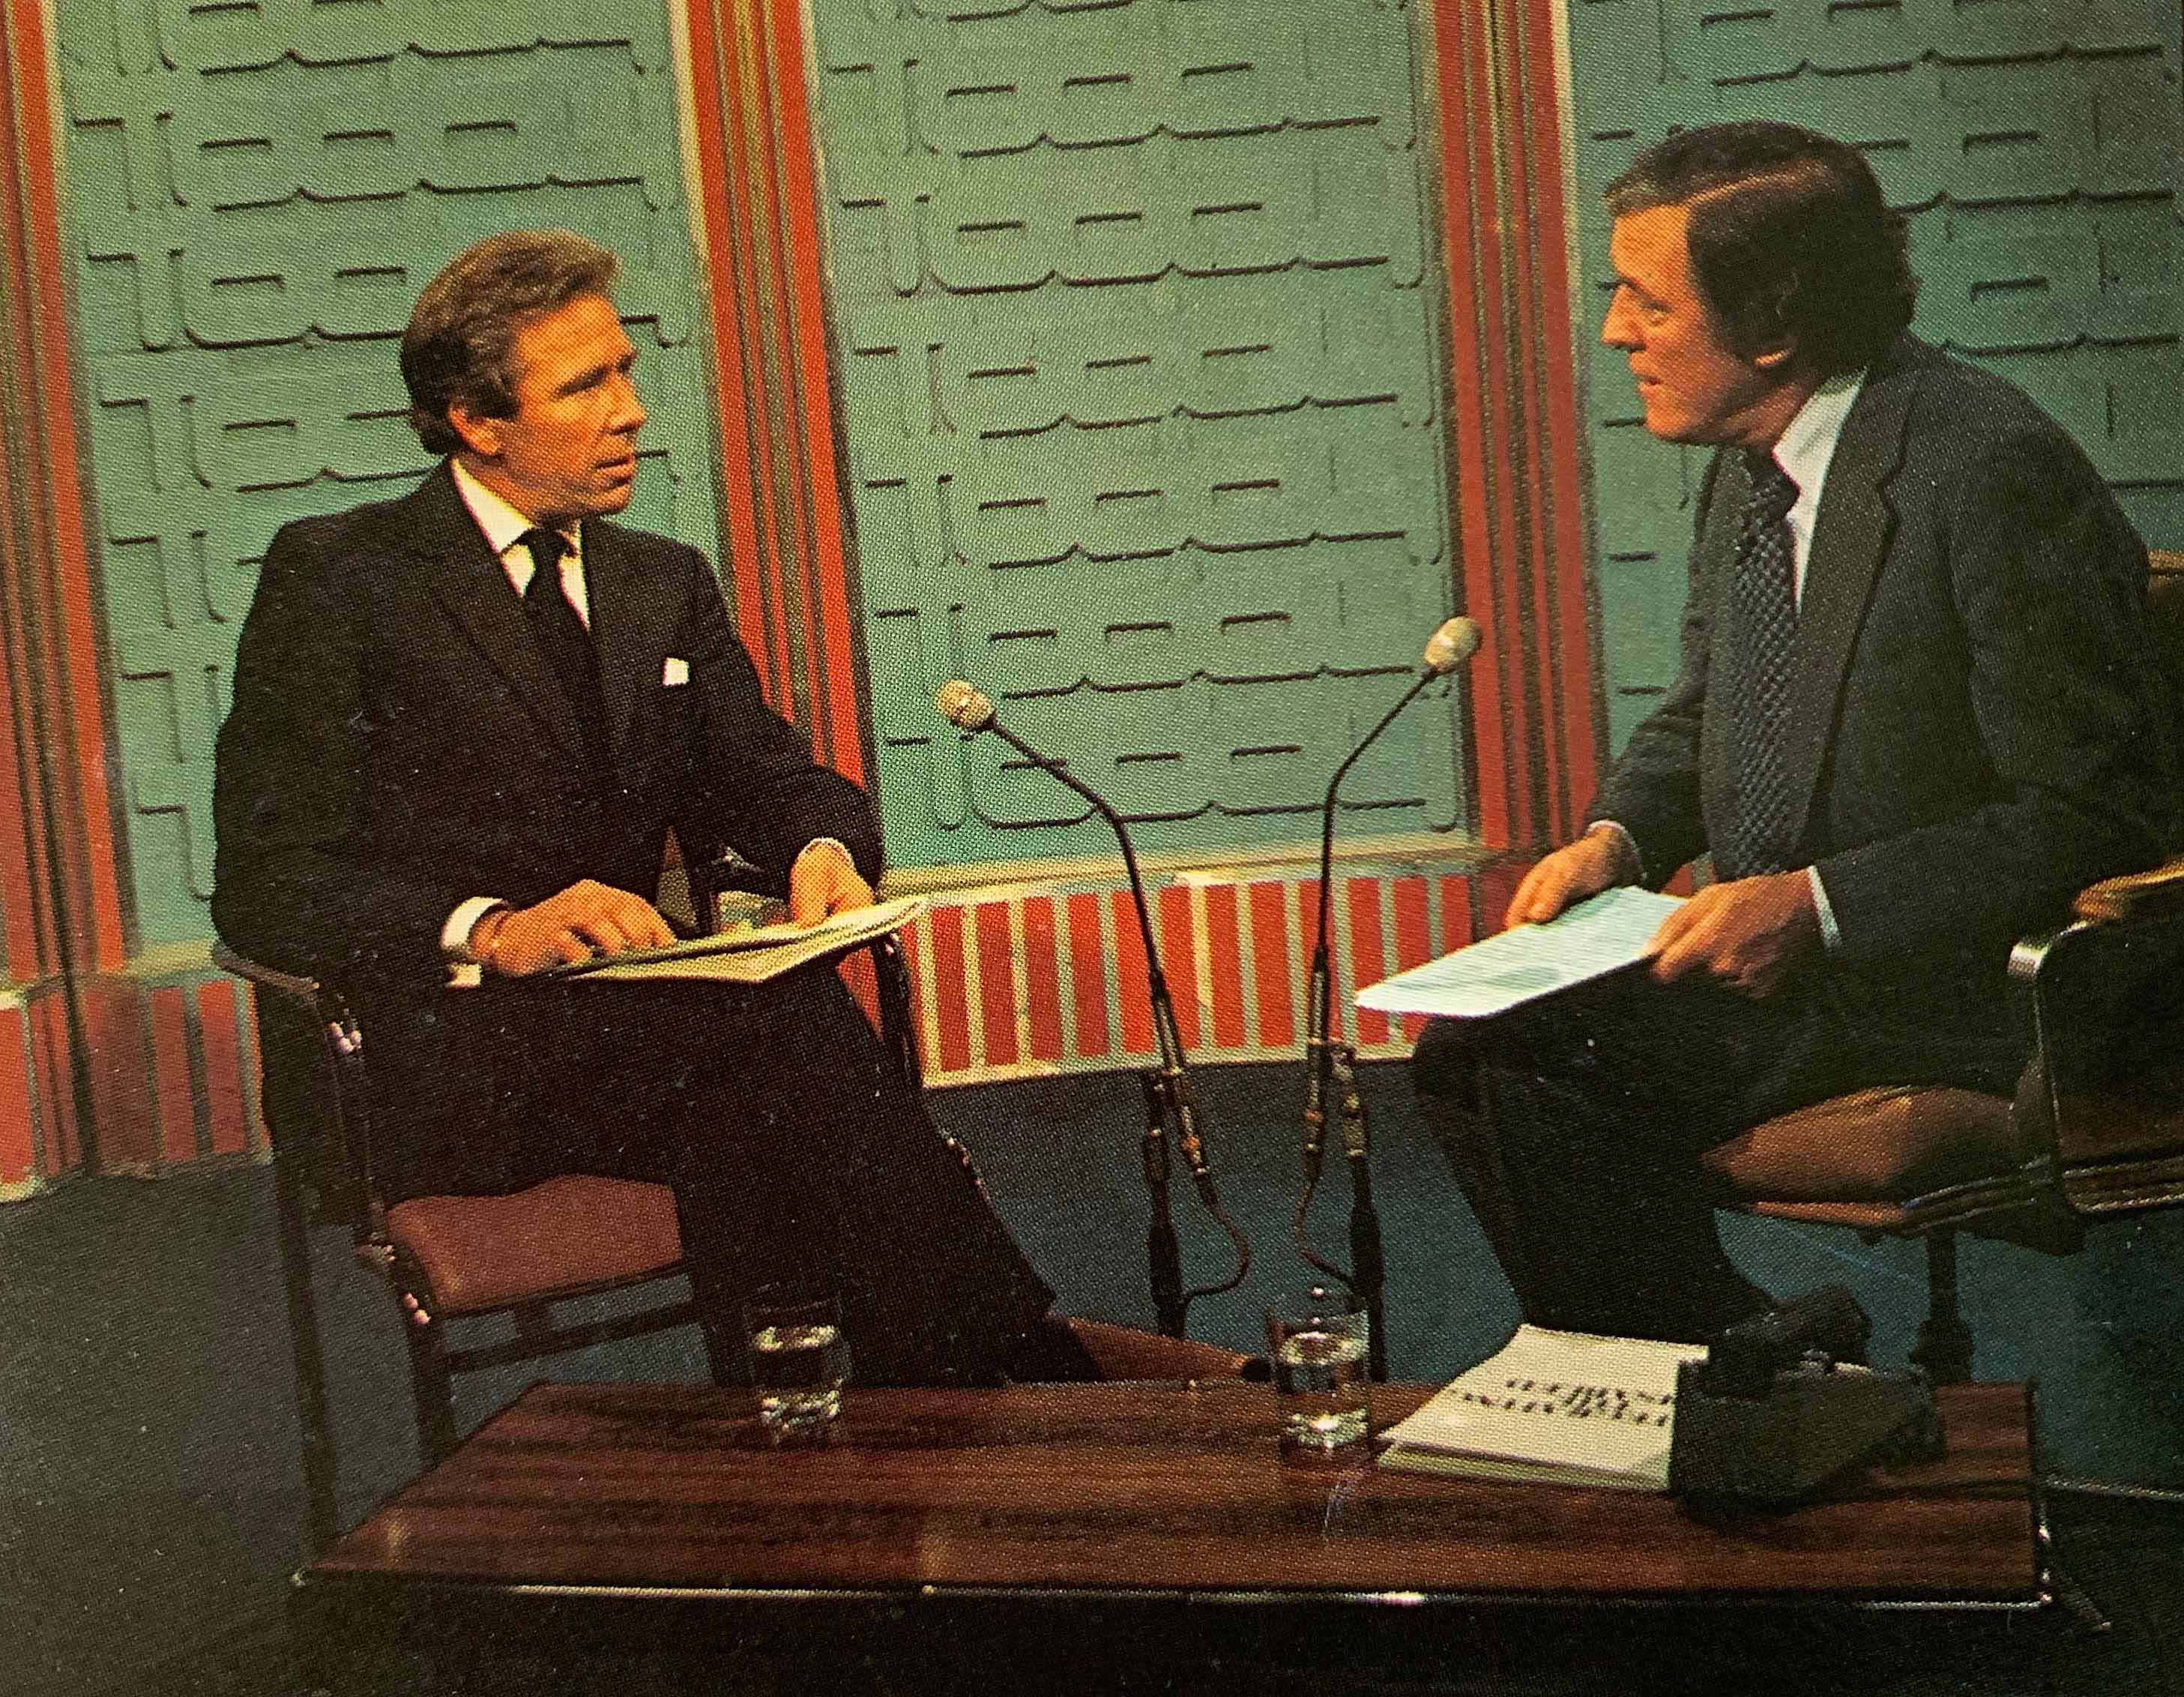 Eamonn Andrews and Lord Snowdon